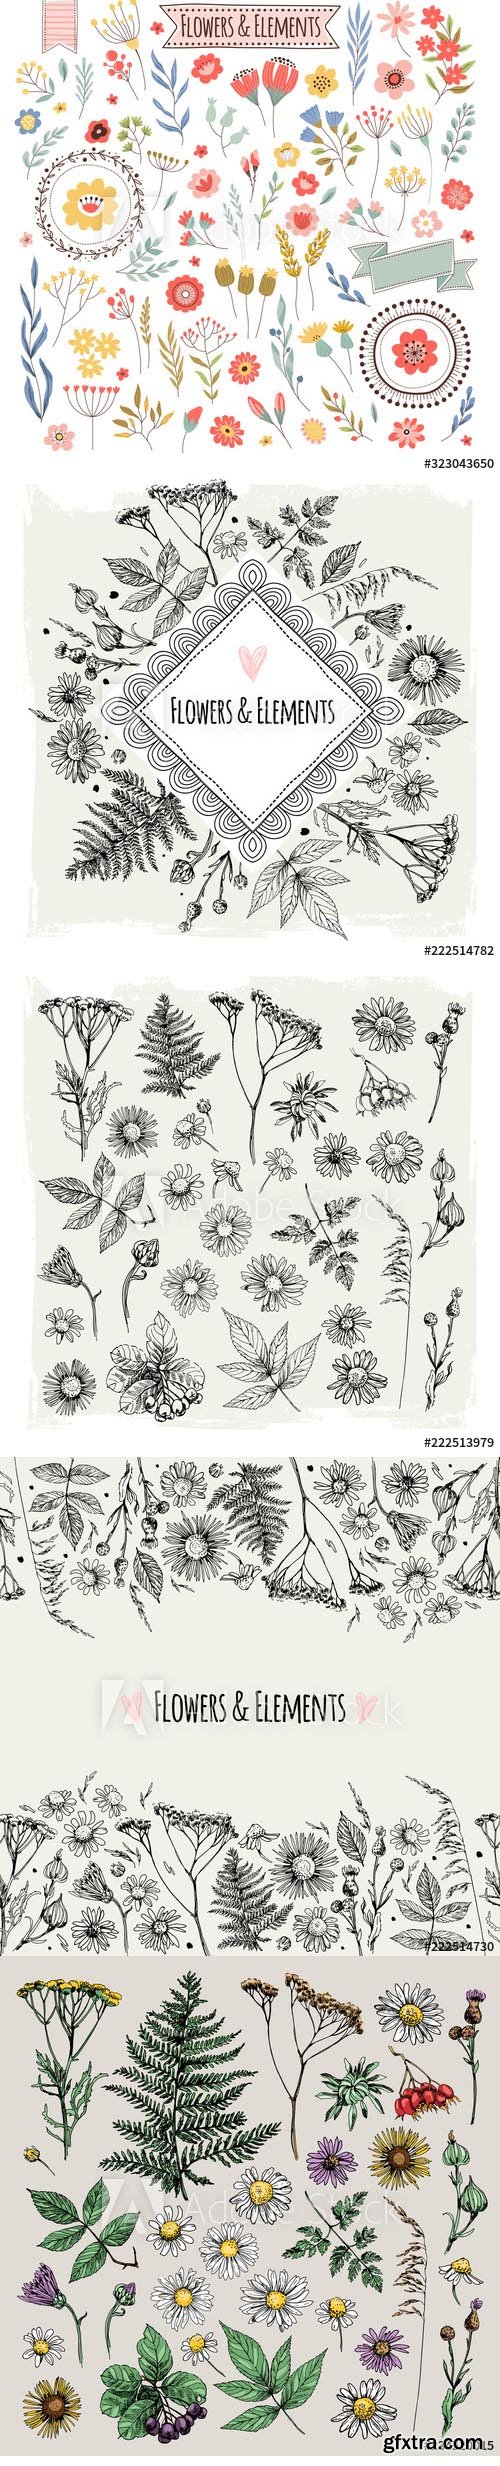 Set of illustrations of plants and flowers